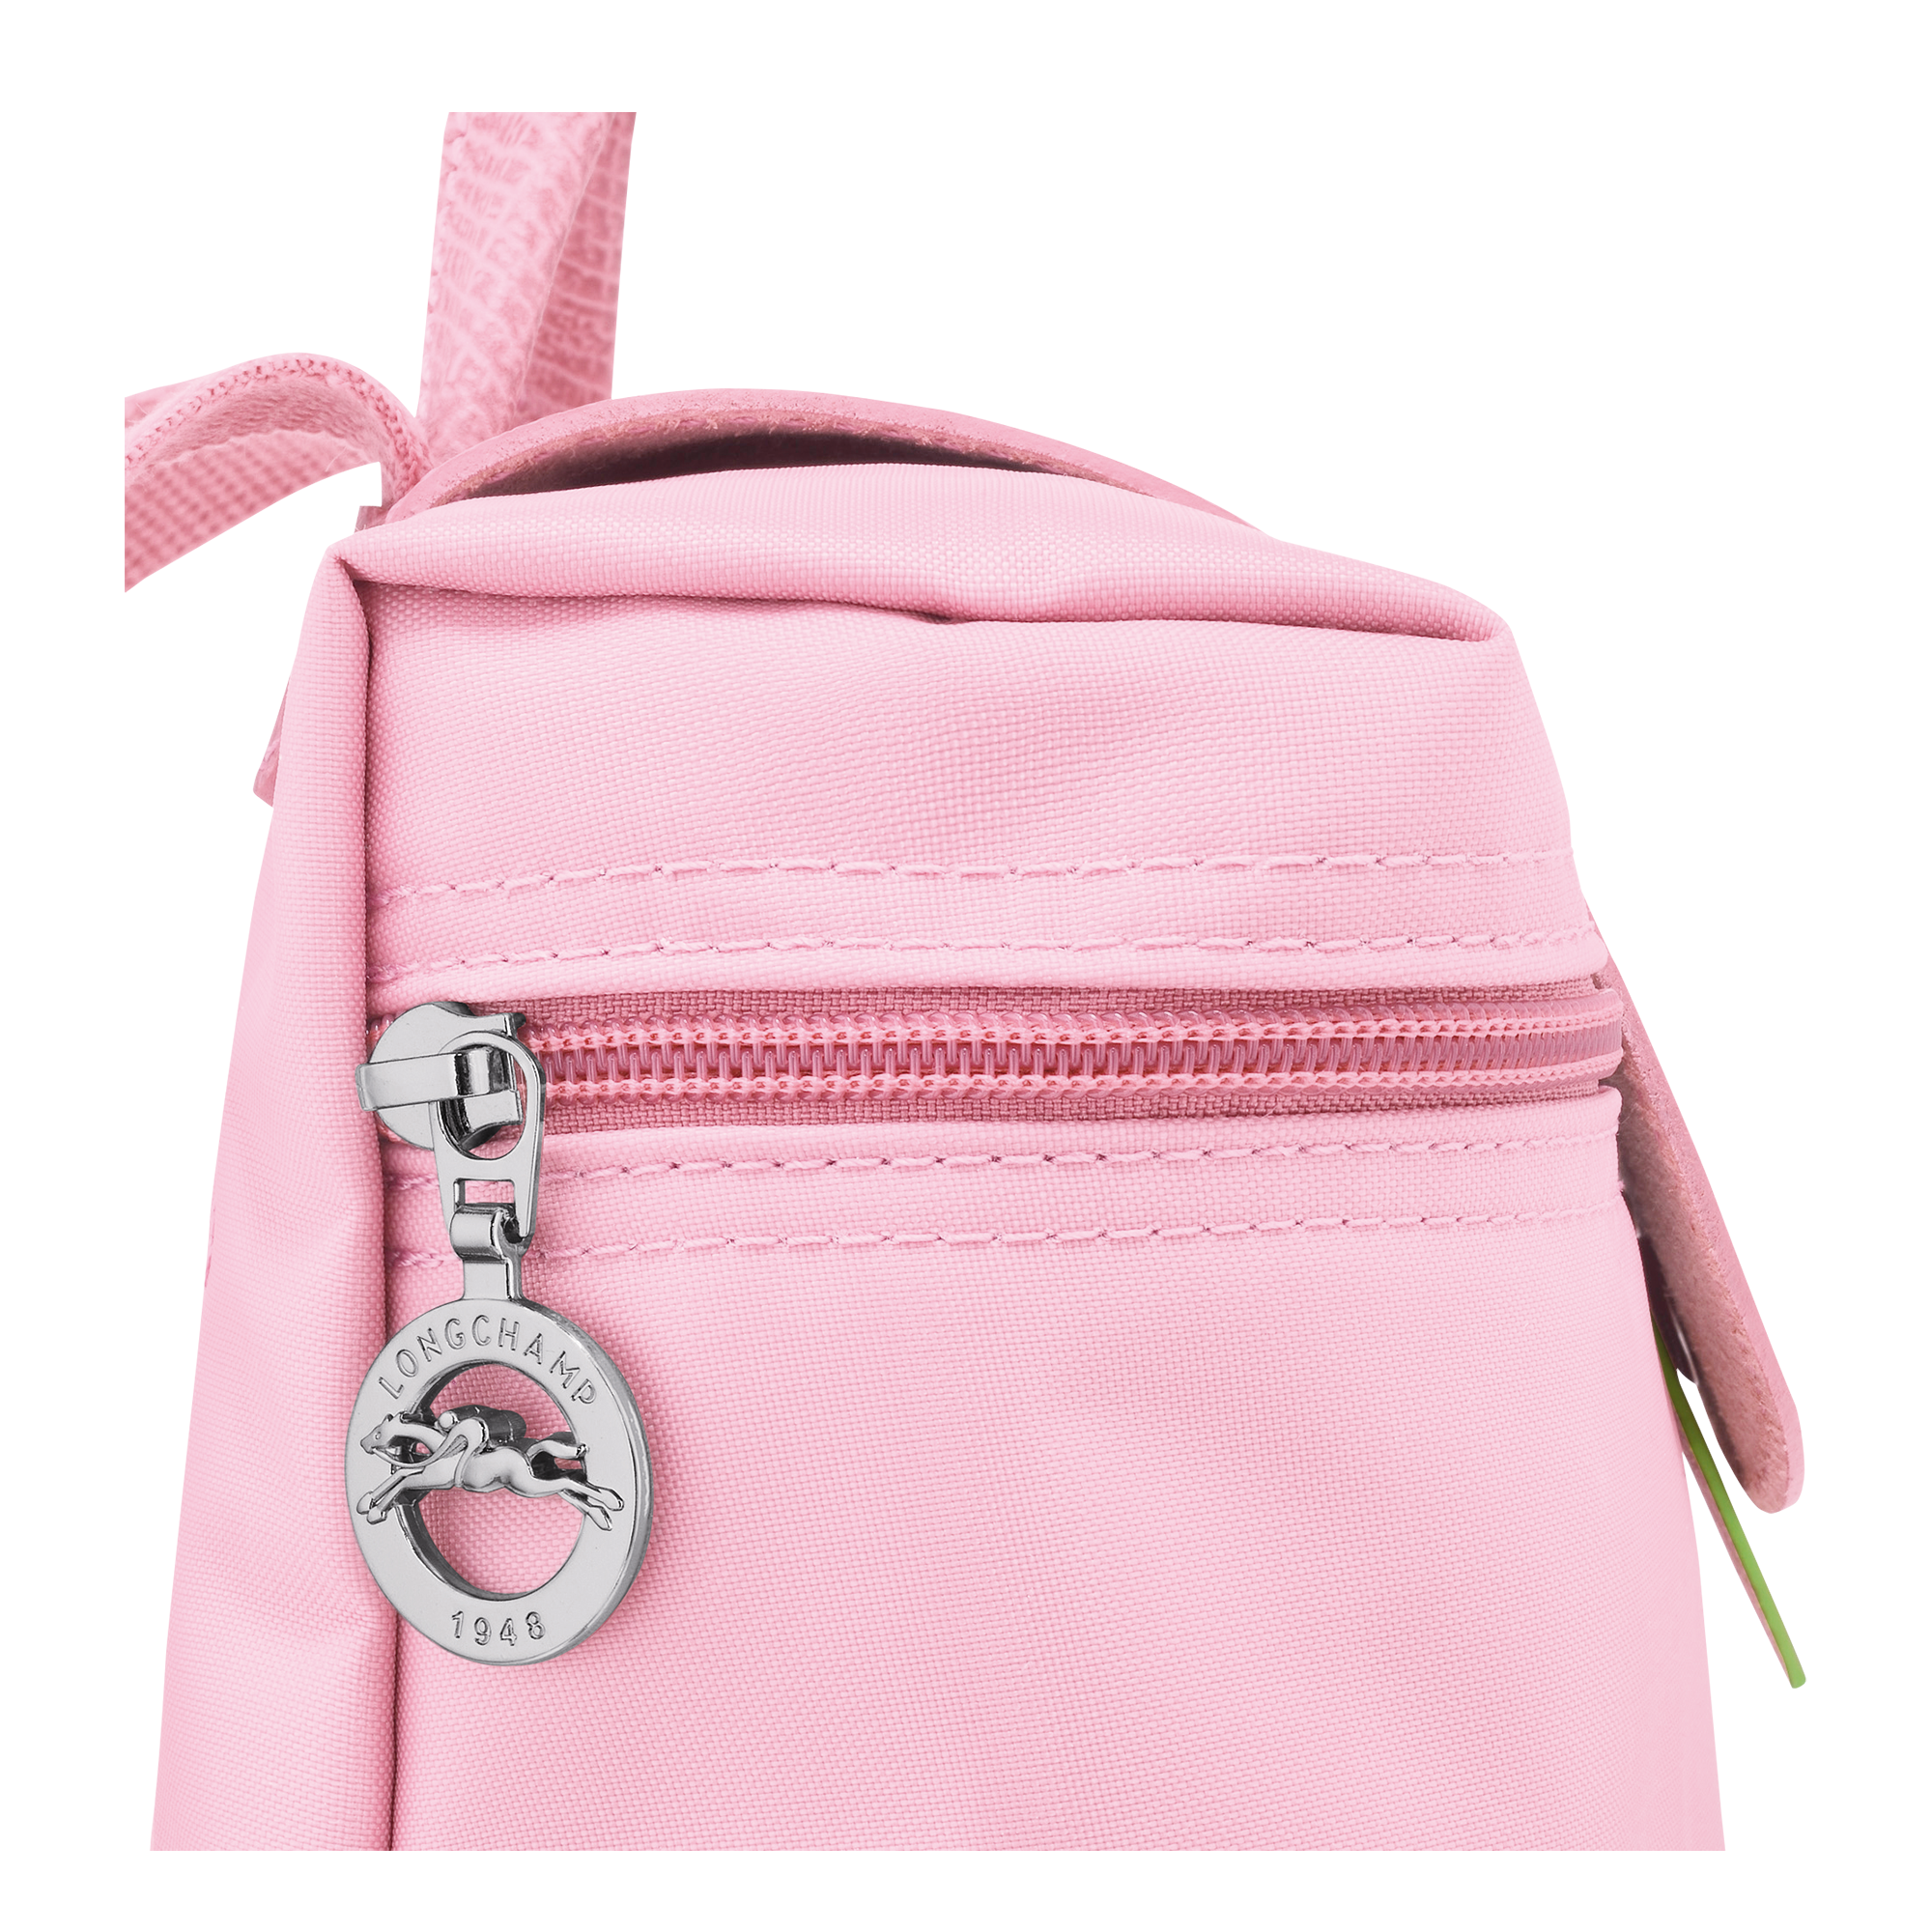 Longchamp LE PLIAGE GREEN - Backpack in Pink - 4 (SKU: L1699919P75)